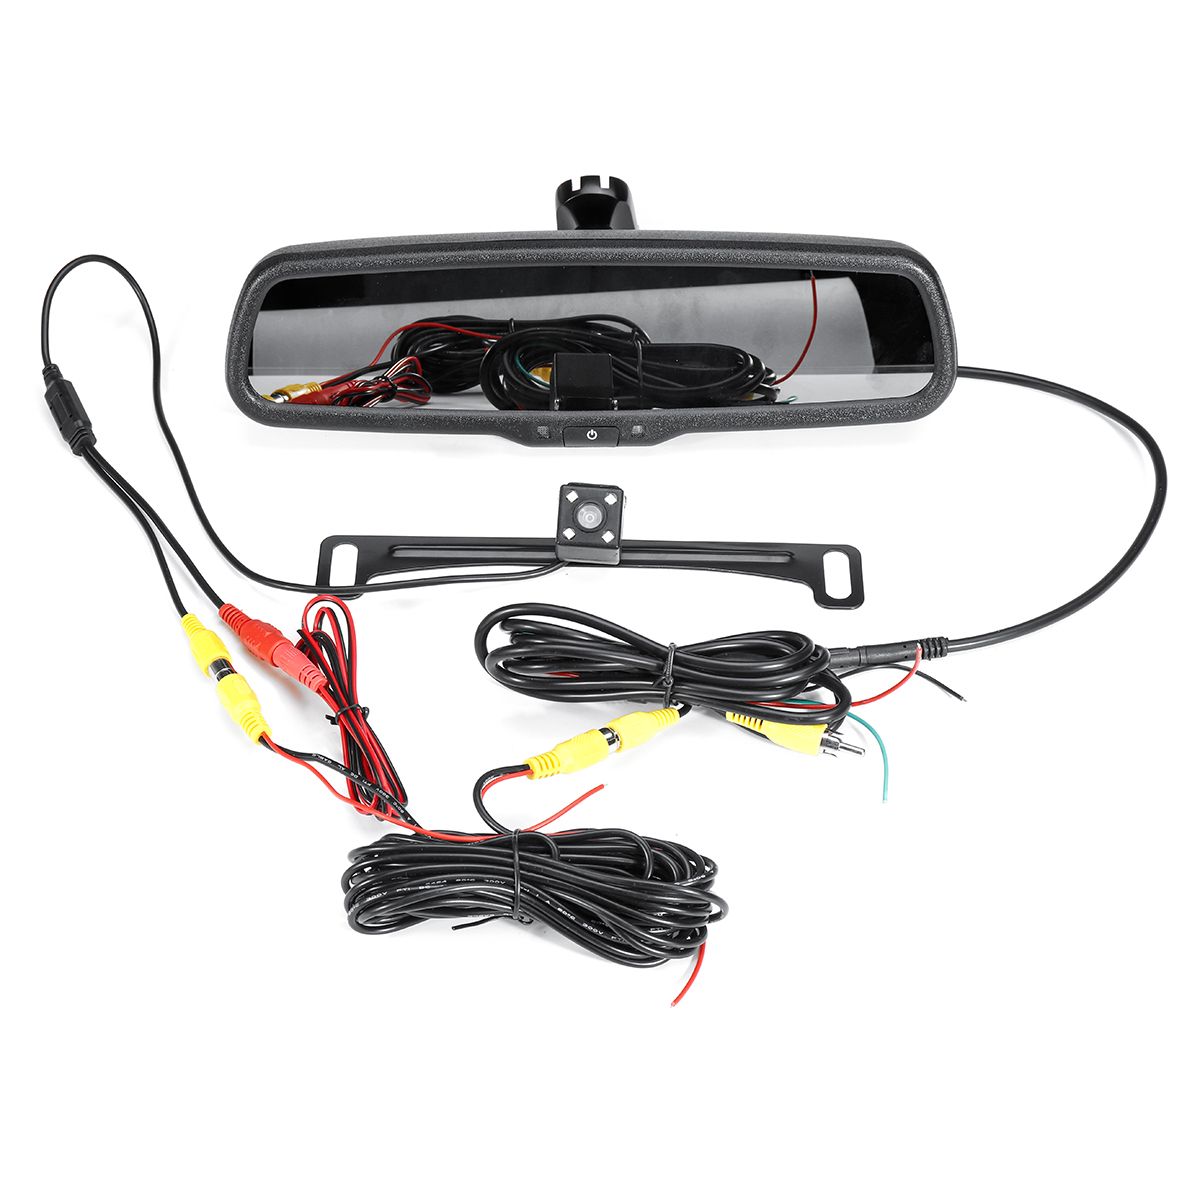 Master-Tailgaters-Car-Rear-View-Mirror-with-43quot-LCD-Screen--170deg-Backup-Camera-1629222